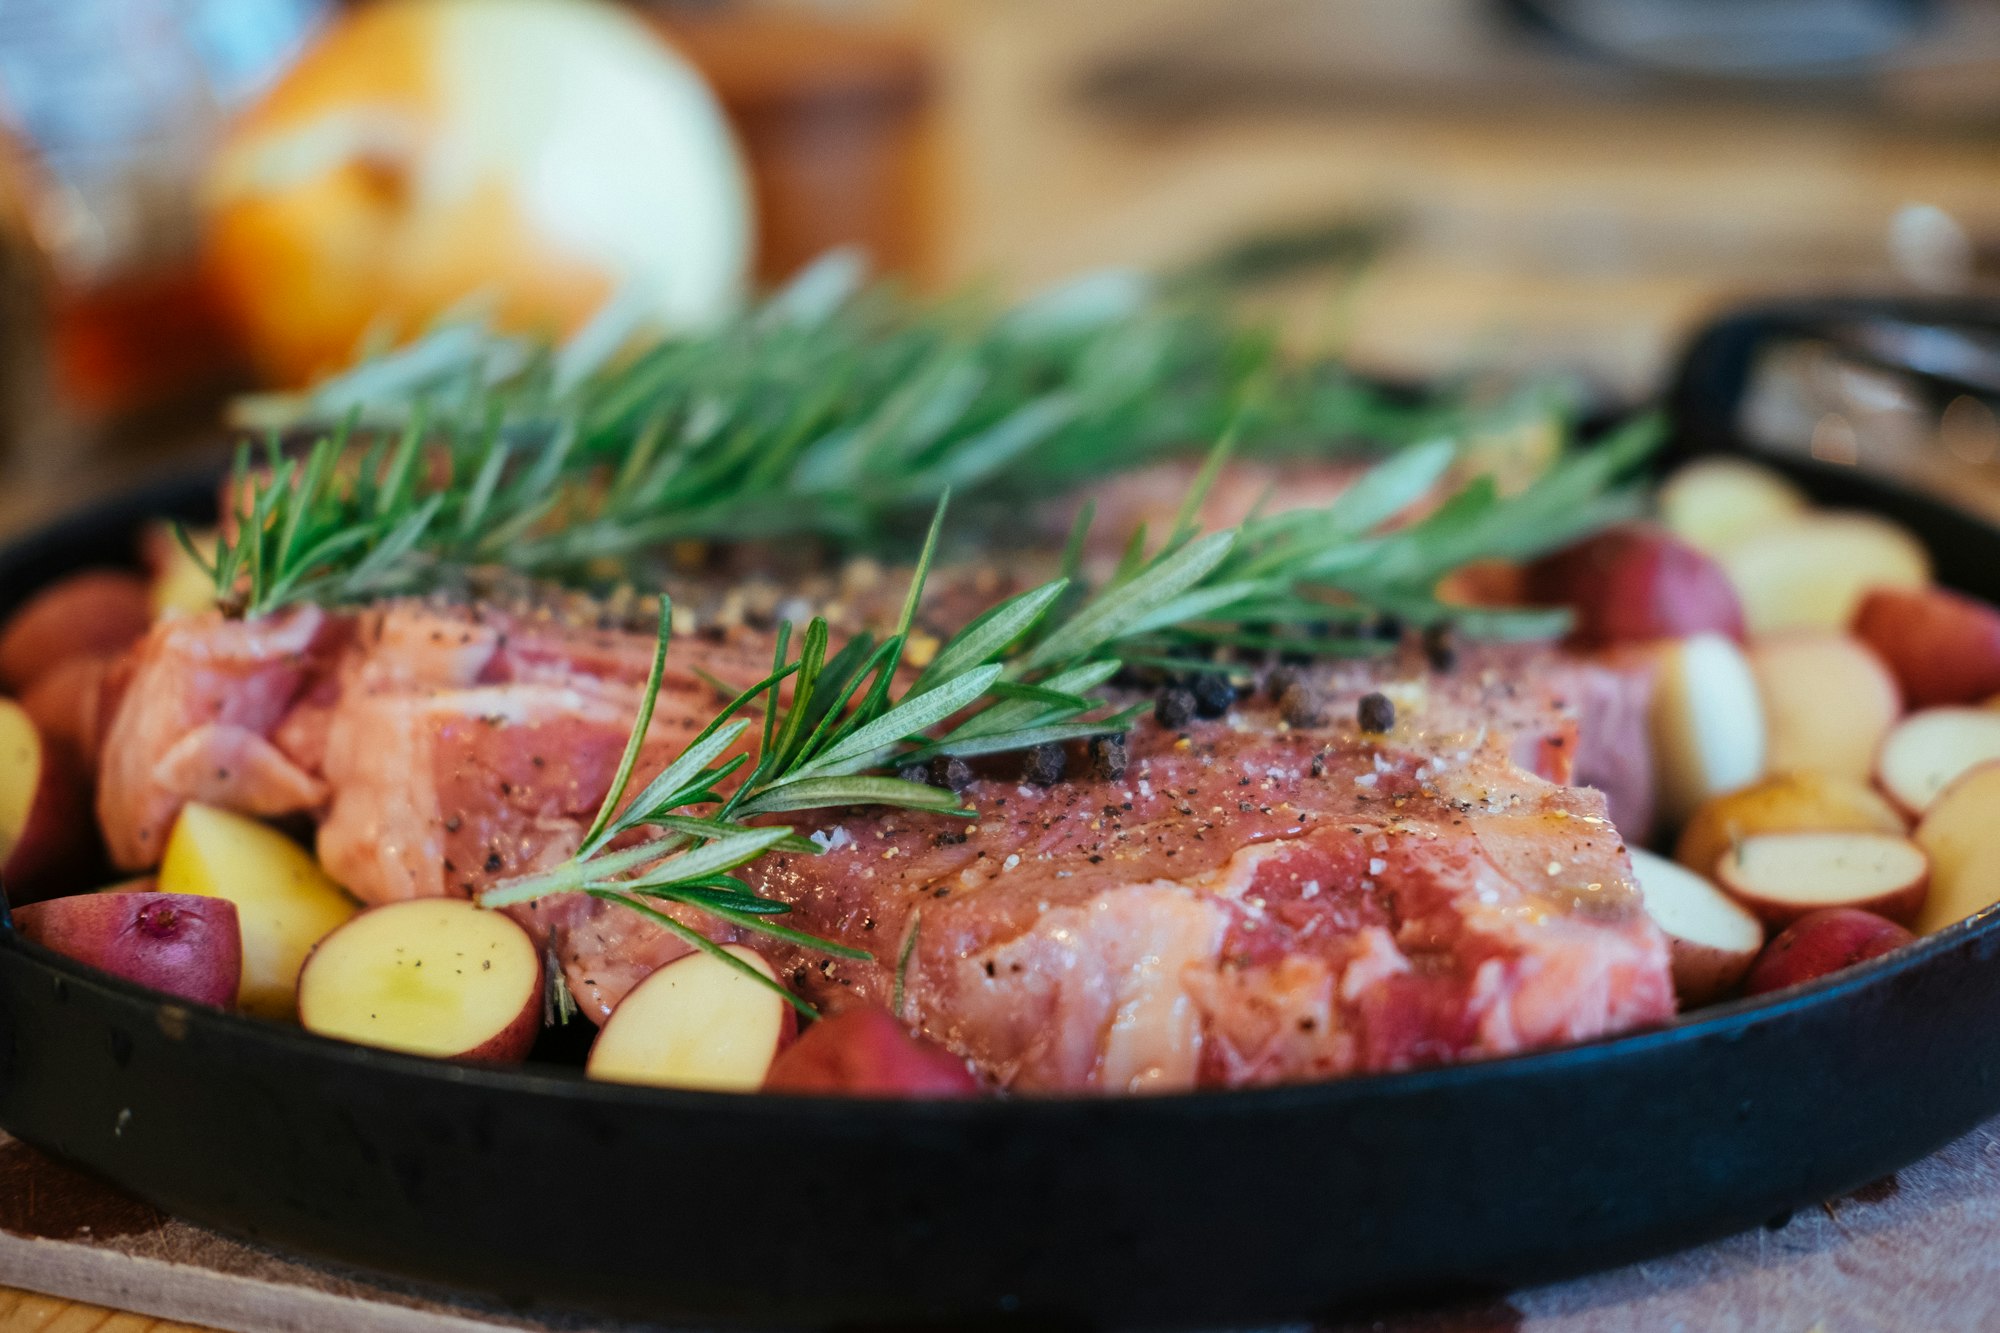 Steaks in a pan seasoned with sea salt, pepper, and rosemary with small potatoes spread around them to capture the au jus (that's french for tasty meat sauce).